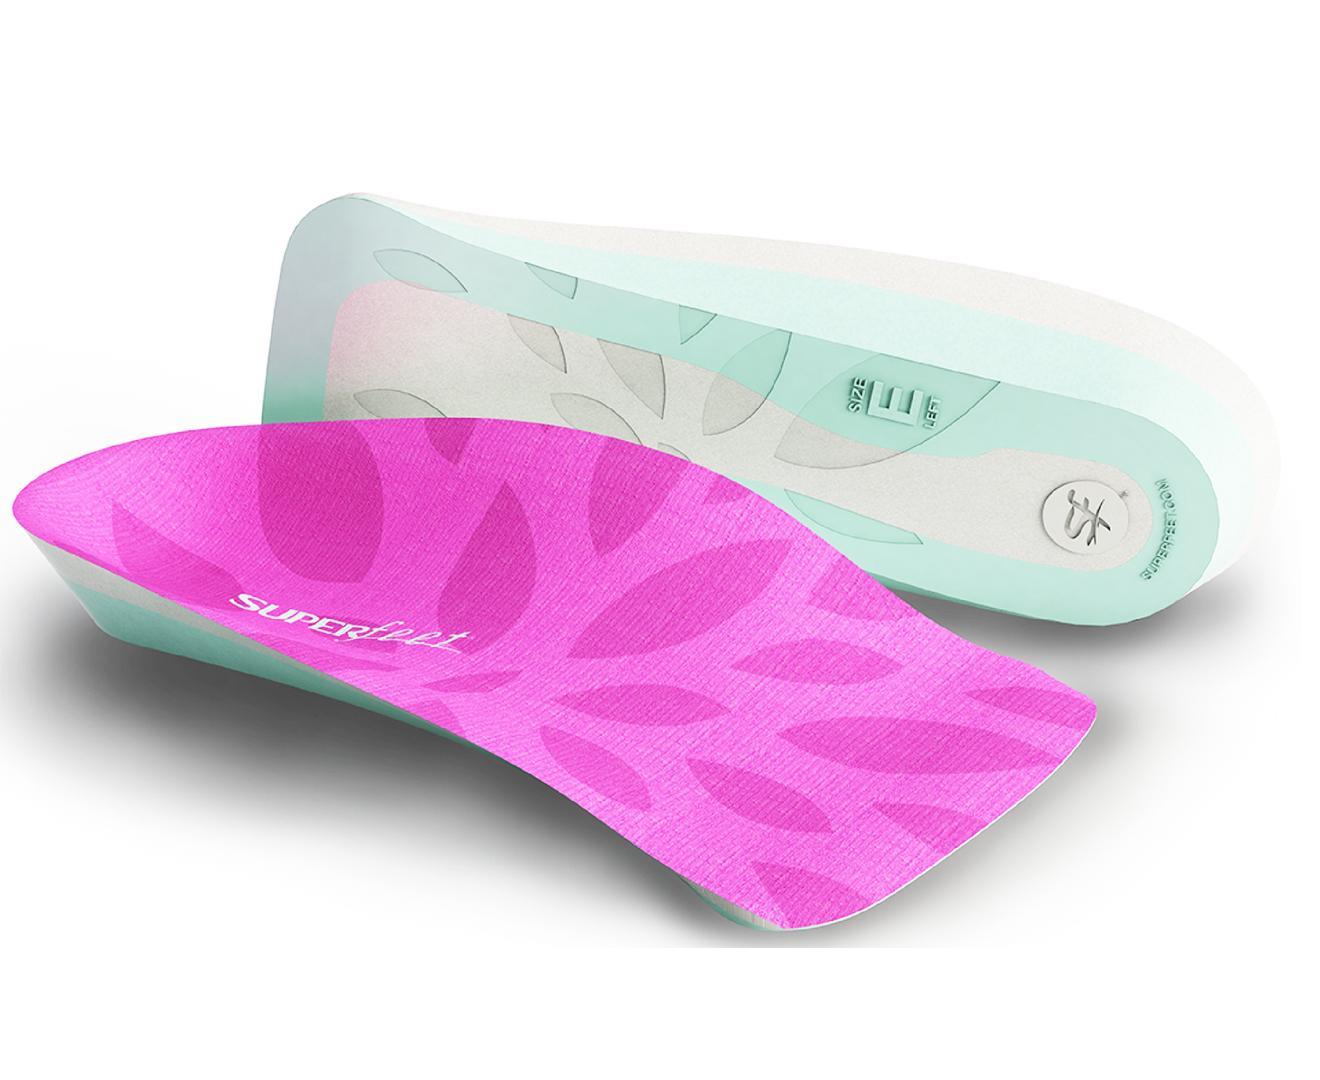 Womens Superfeet Me 3/4 Length Insoles Inserts Orthotics Arch Support Cushion - Blush - E (10.5-12)